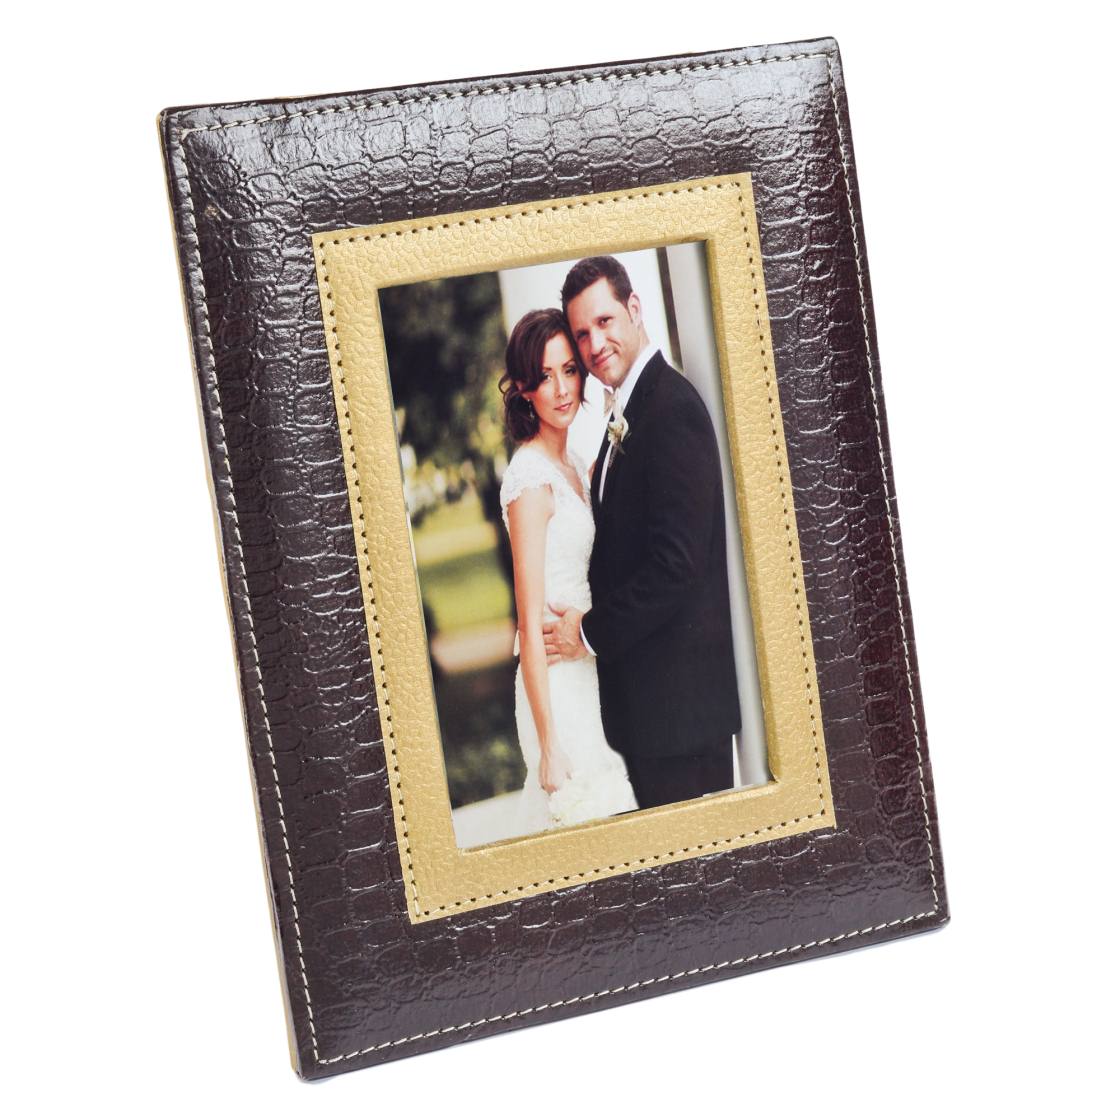 Ecoleatherette 5"x7" Photo Frame with Hanging and Standing Options (RPF57.Crocodile)